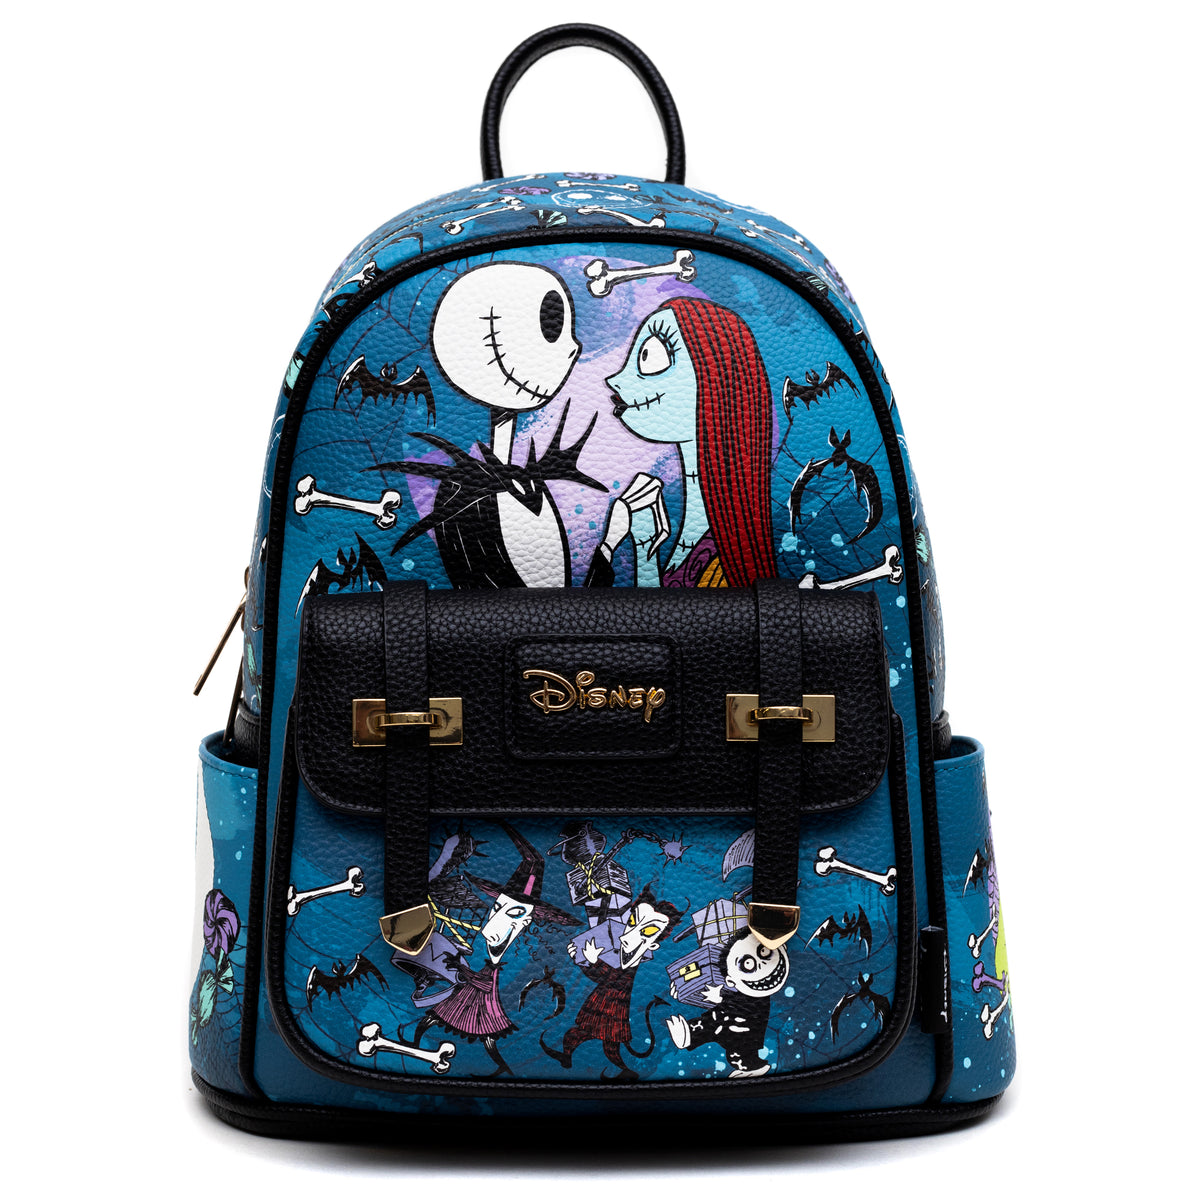 Nightmare Before Christmas Simply Meant to Be Mini Backpack - Limited Edition